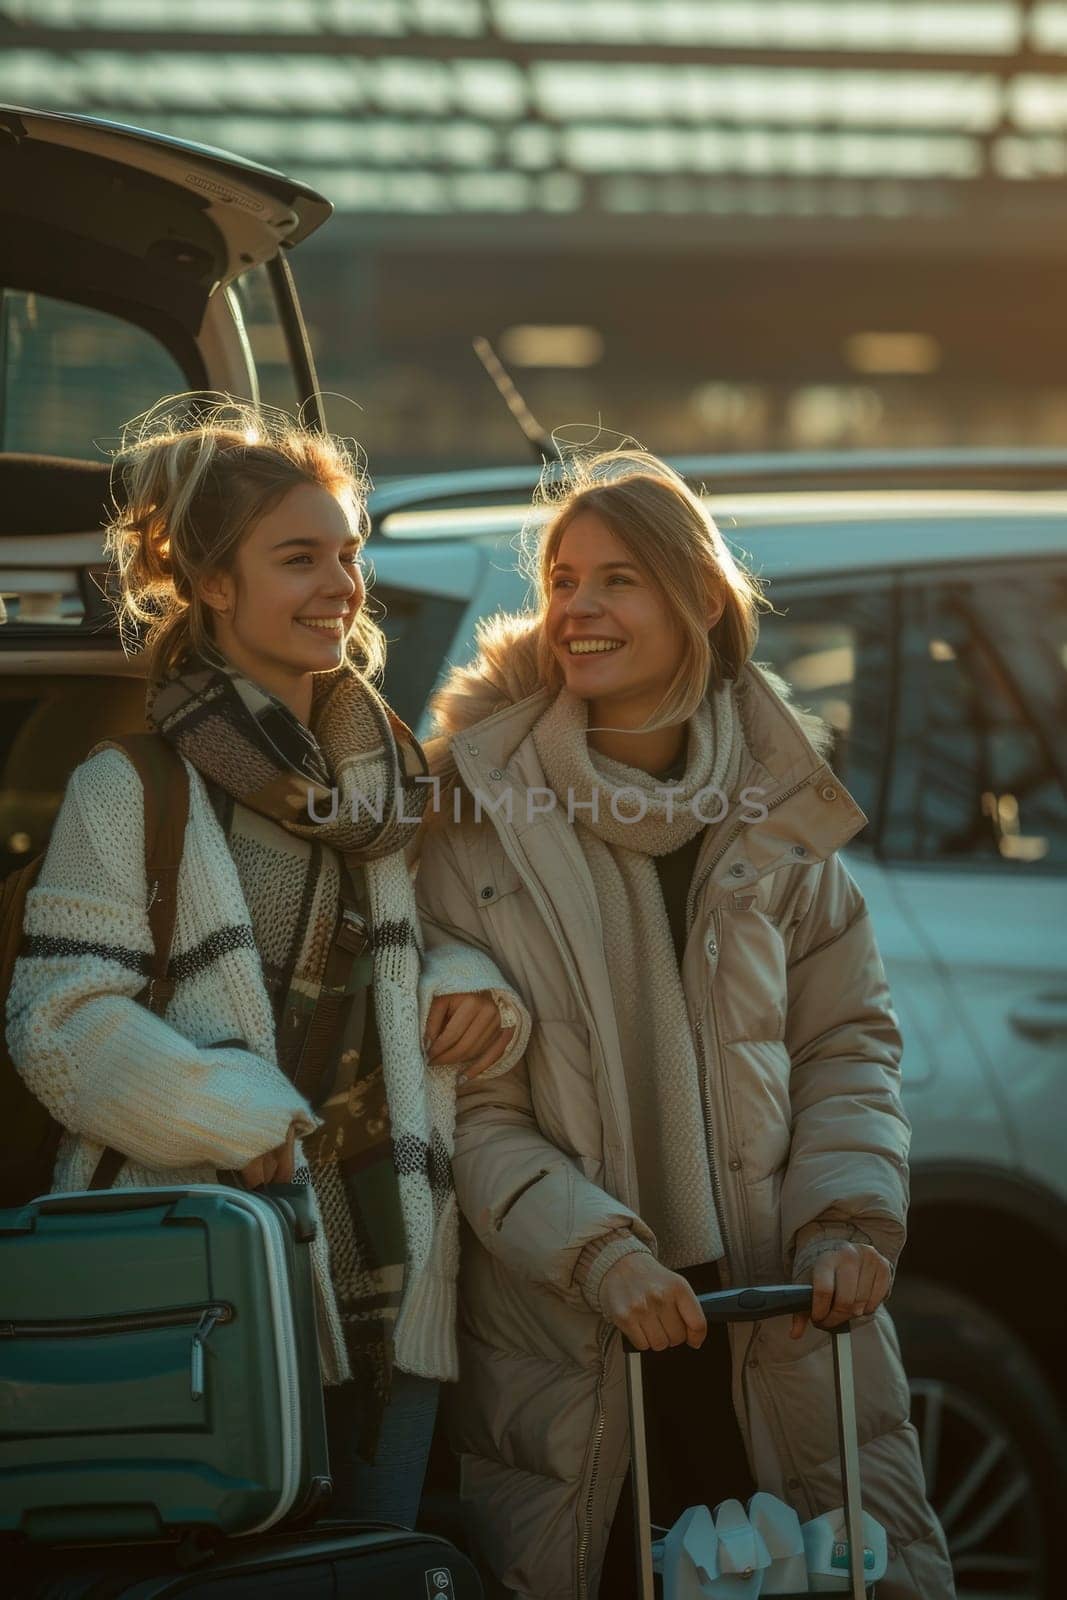 Two women are smiling and holding suitcases while standing in front of a car. They seem to be excited about their trip